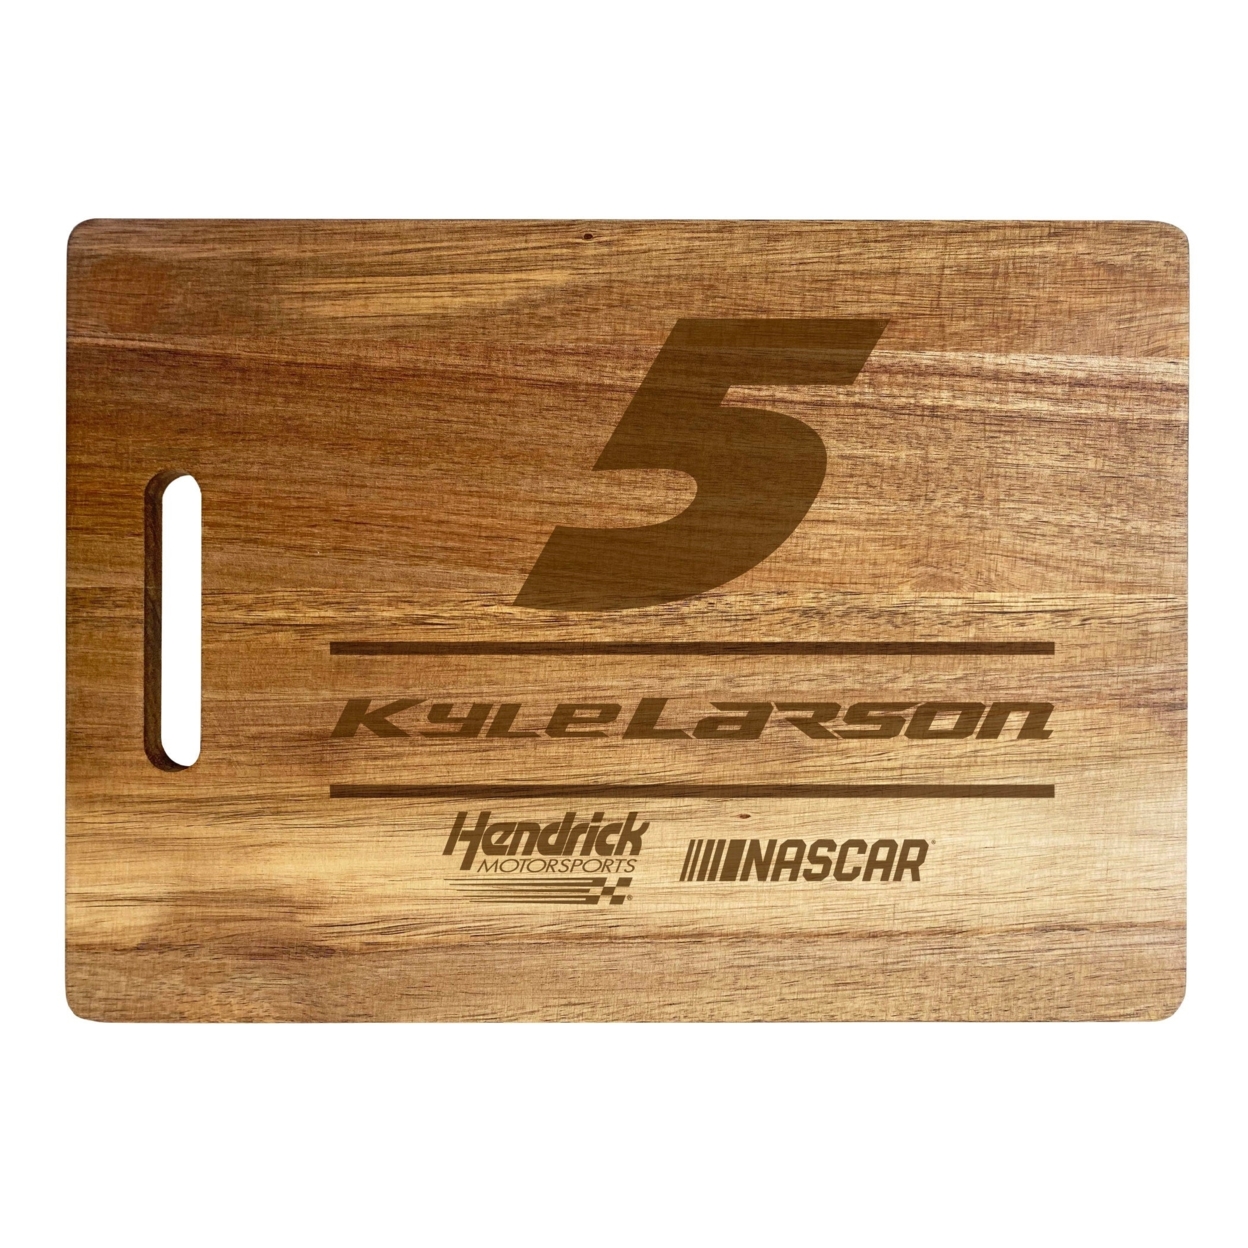 #5 Kyle Larson NASCAR Officially Licensed Engraved Wooden Cutting Board